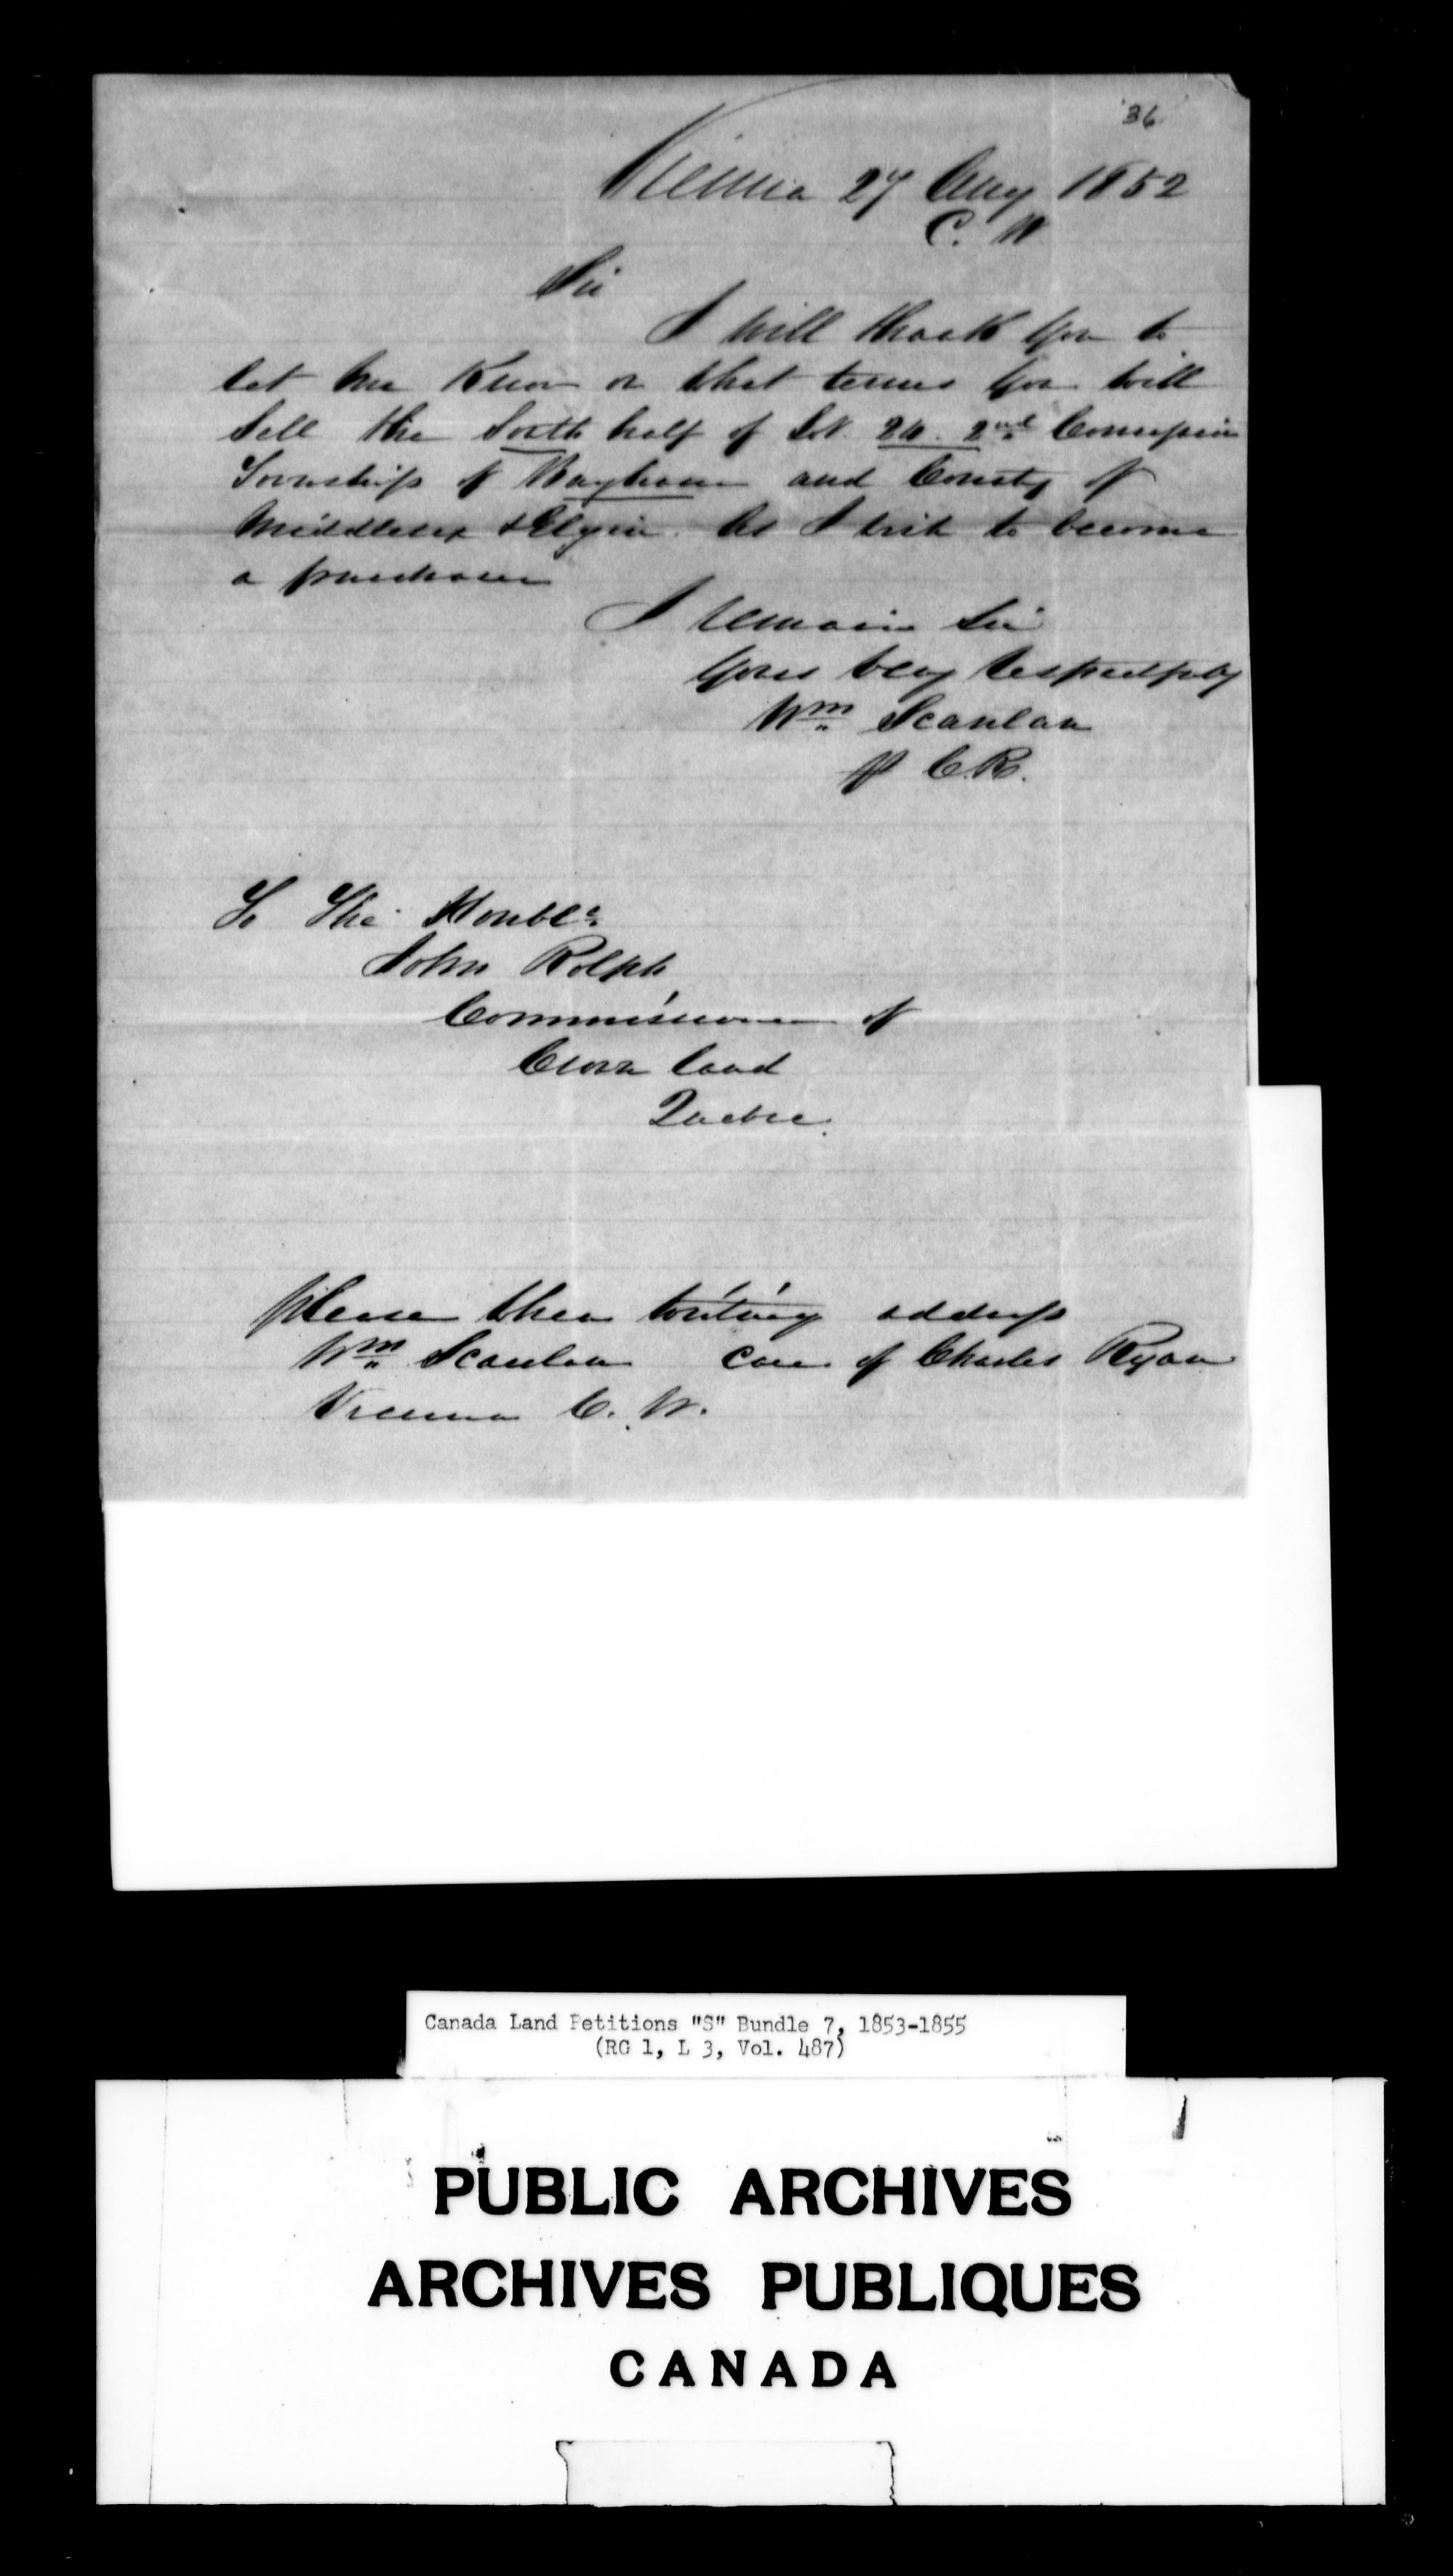 Title: Upper Canada Land Petitions (1763-1865) - Mikan Number: 205131 - Microform: c-2828